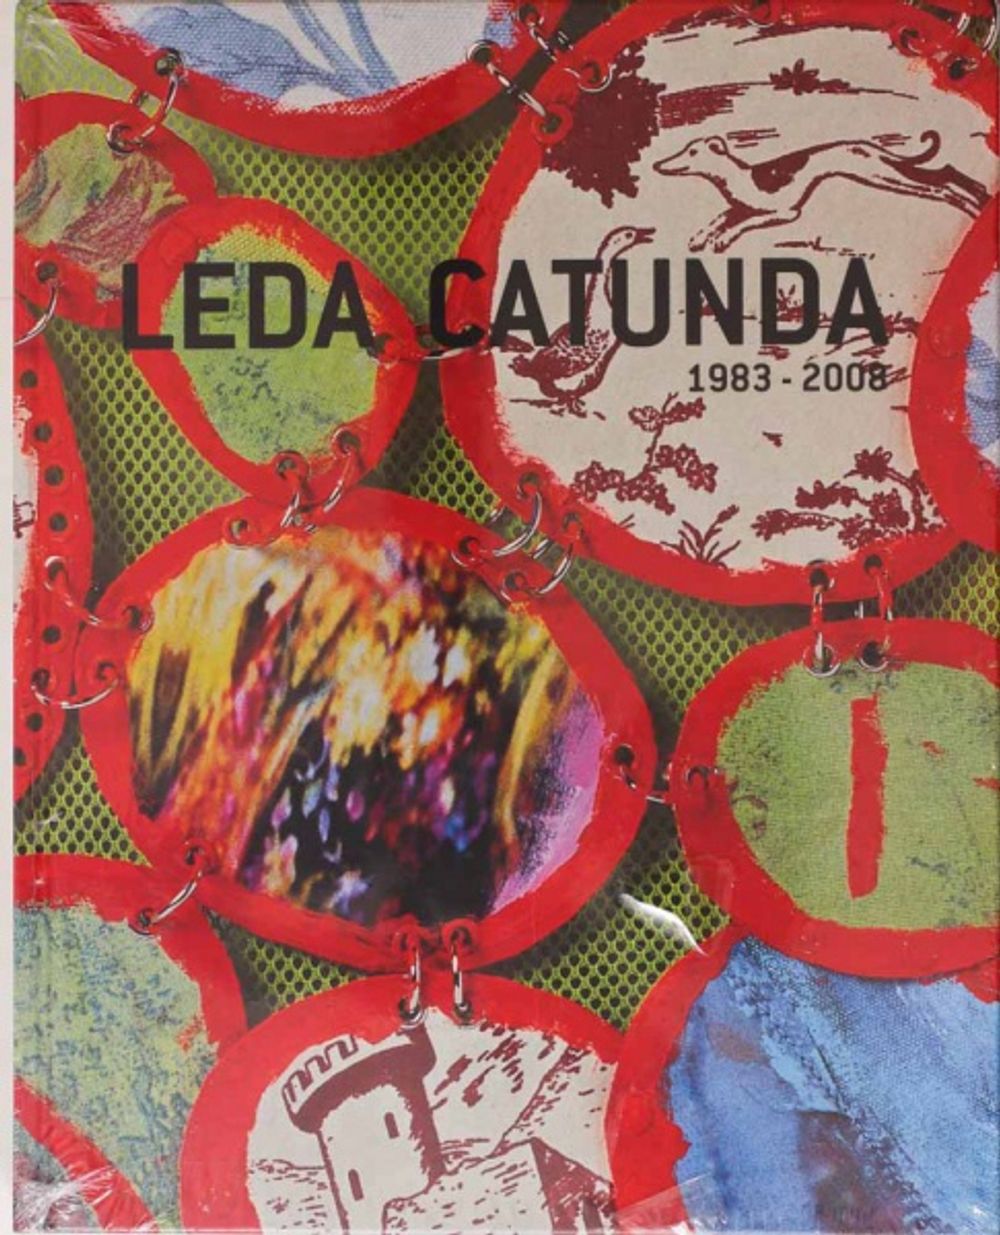 Book cover on plain gray background with title of Leda Catunda: 1983-2008